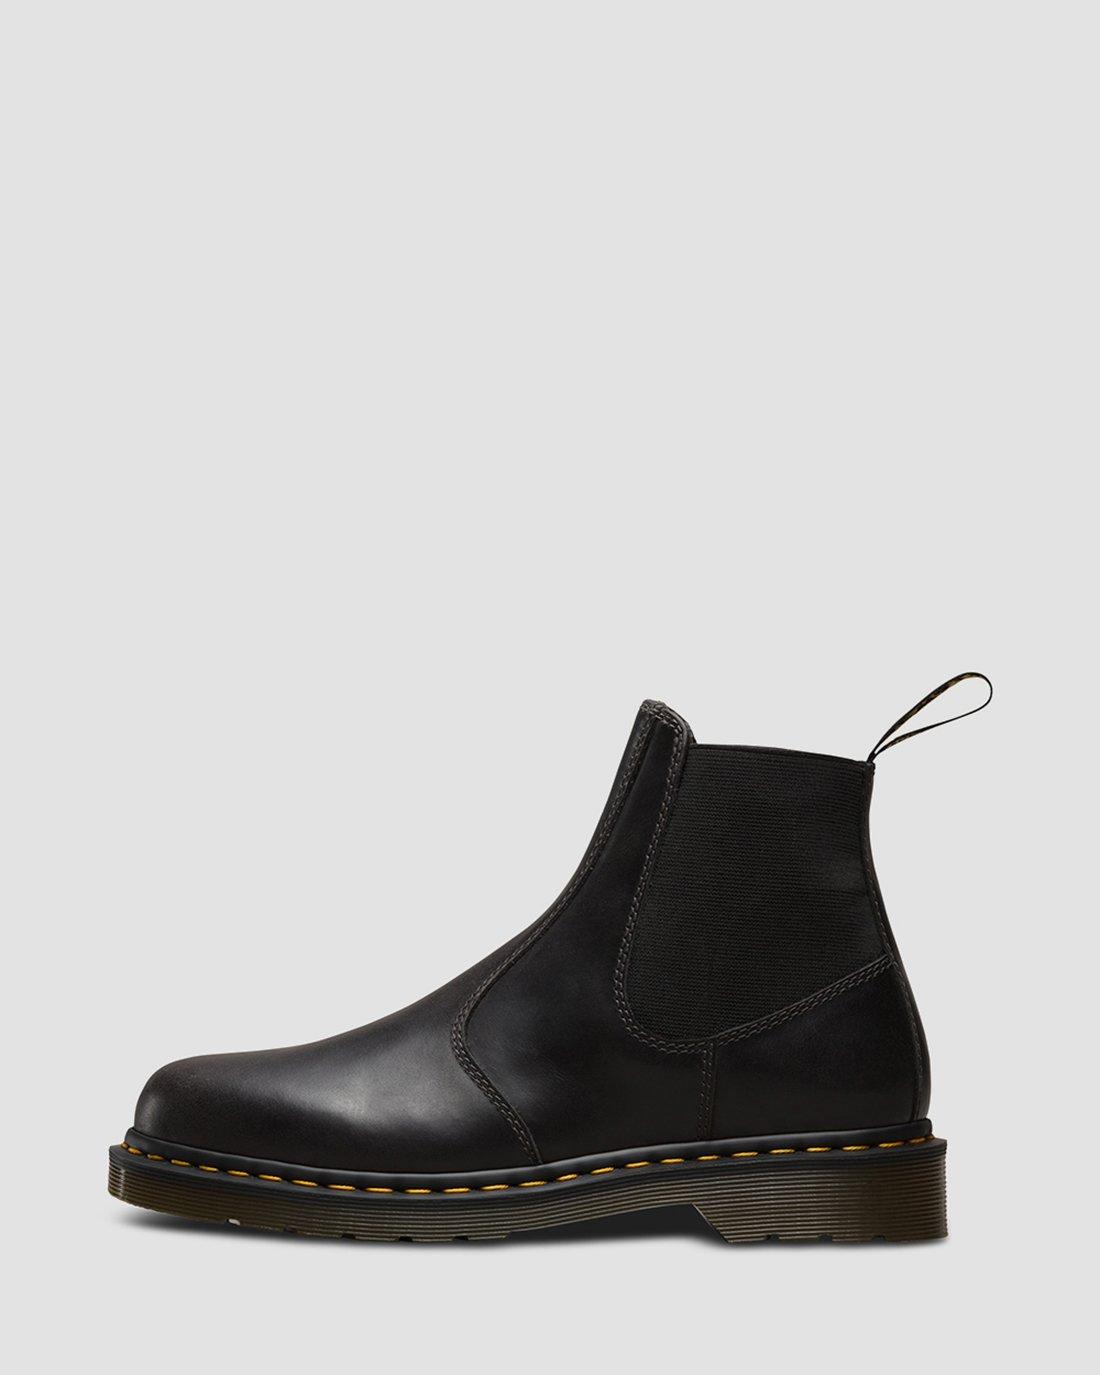 2976 Hardy Orleans2976 Hardy Orleans Dr. Martens